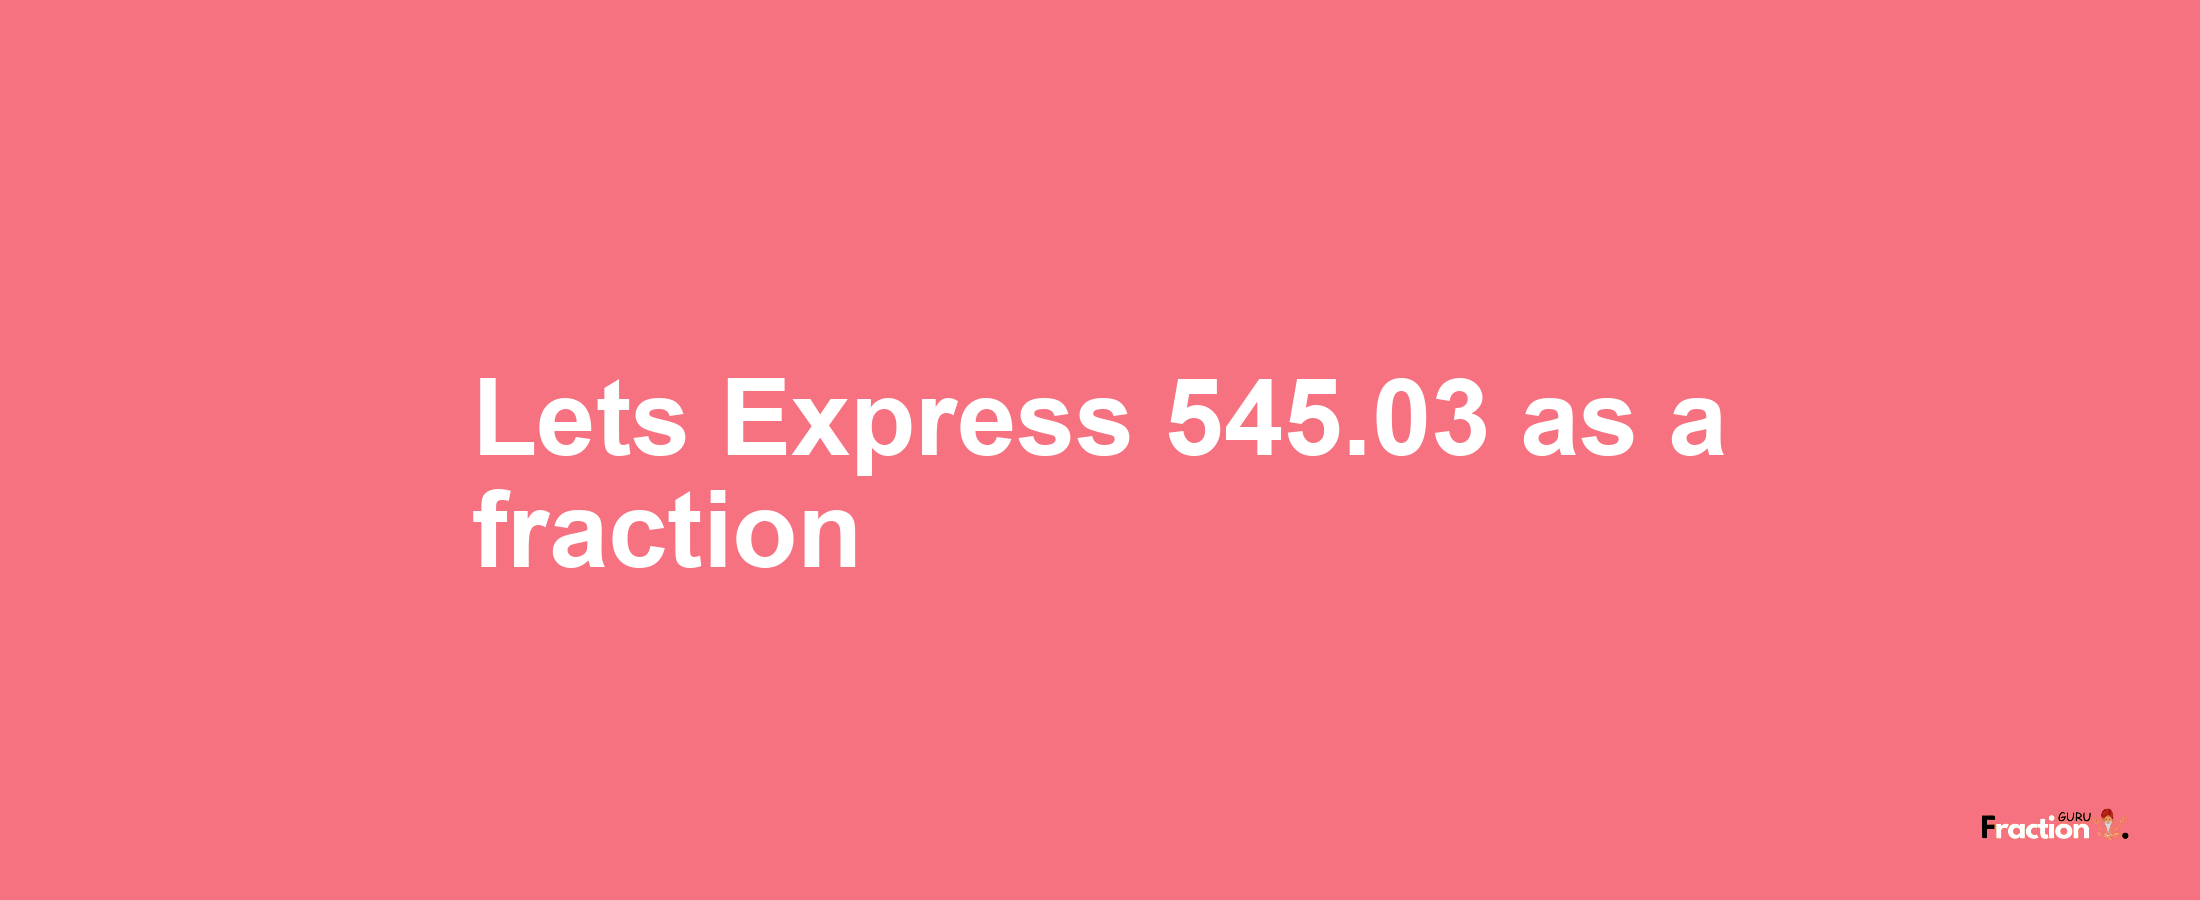 Lets Express 545.03 as afraction